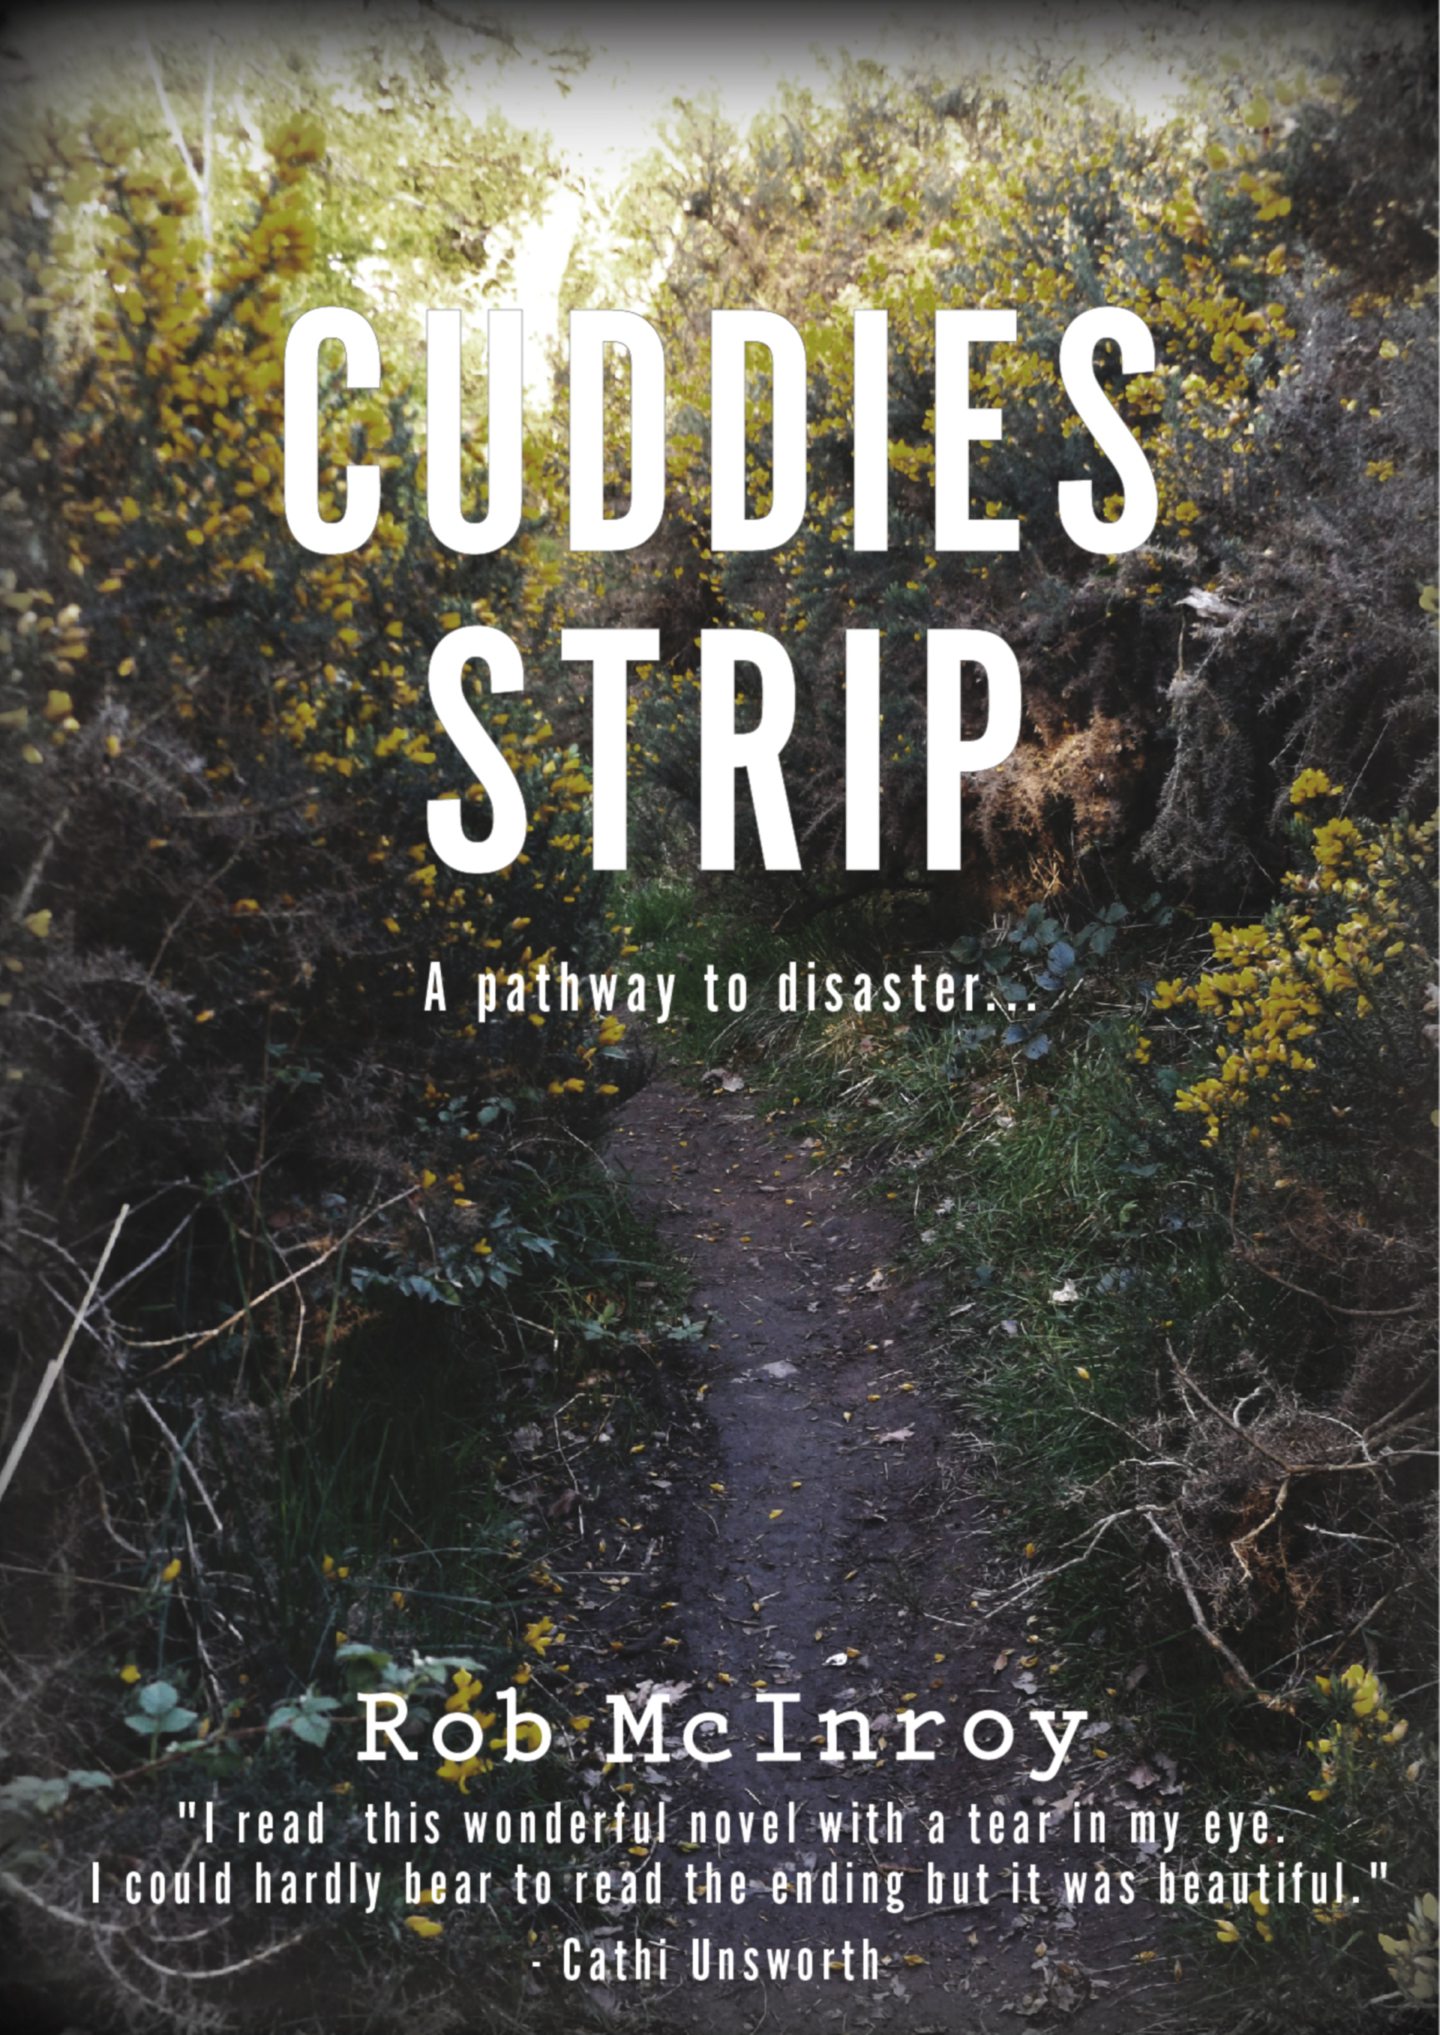 The book cover for Cuddies Strip by Rob McInroy